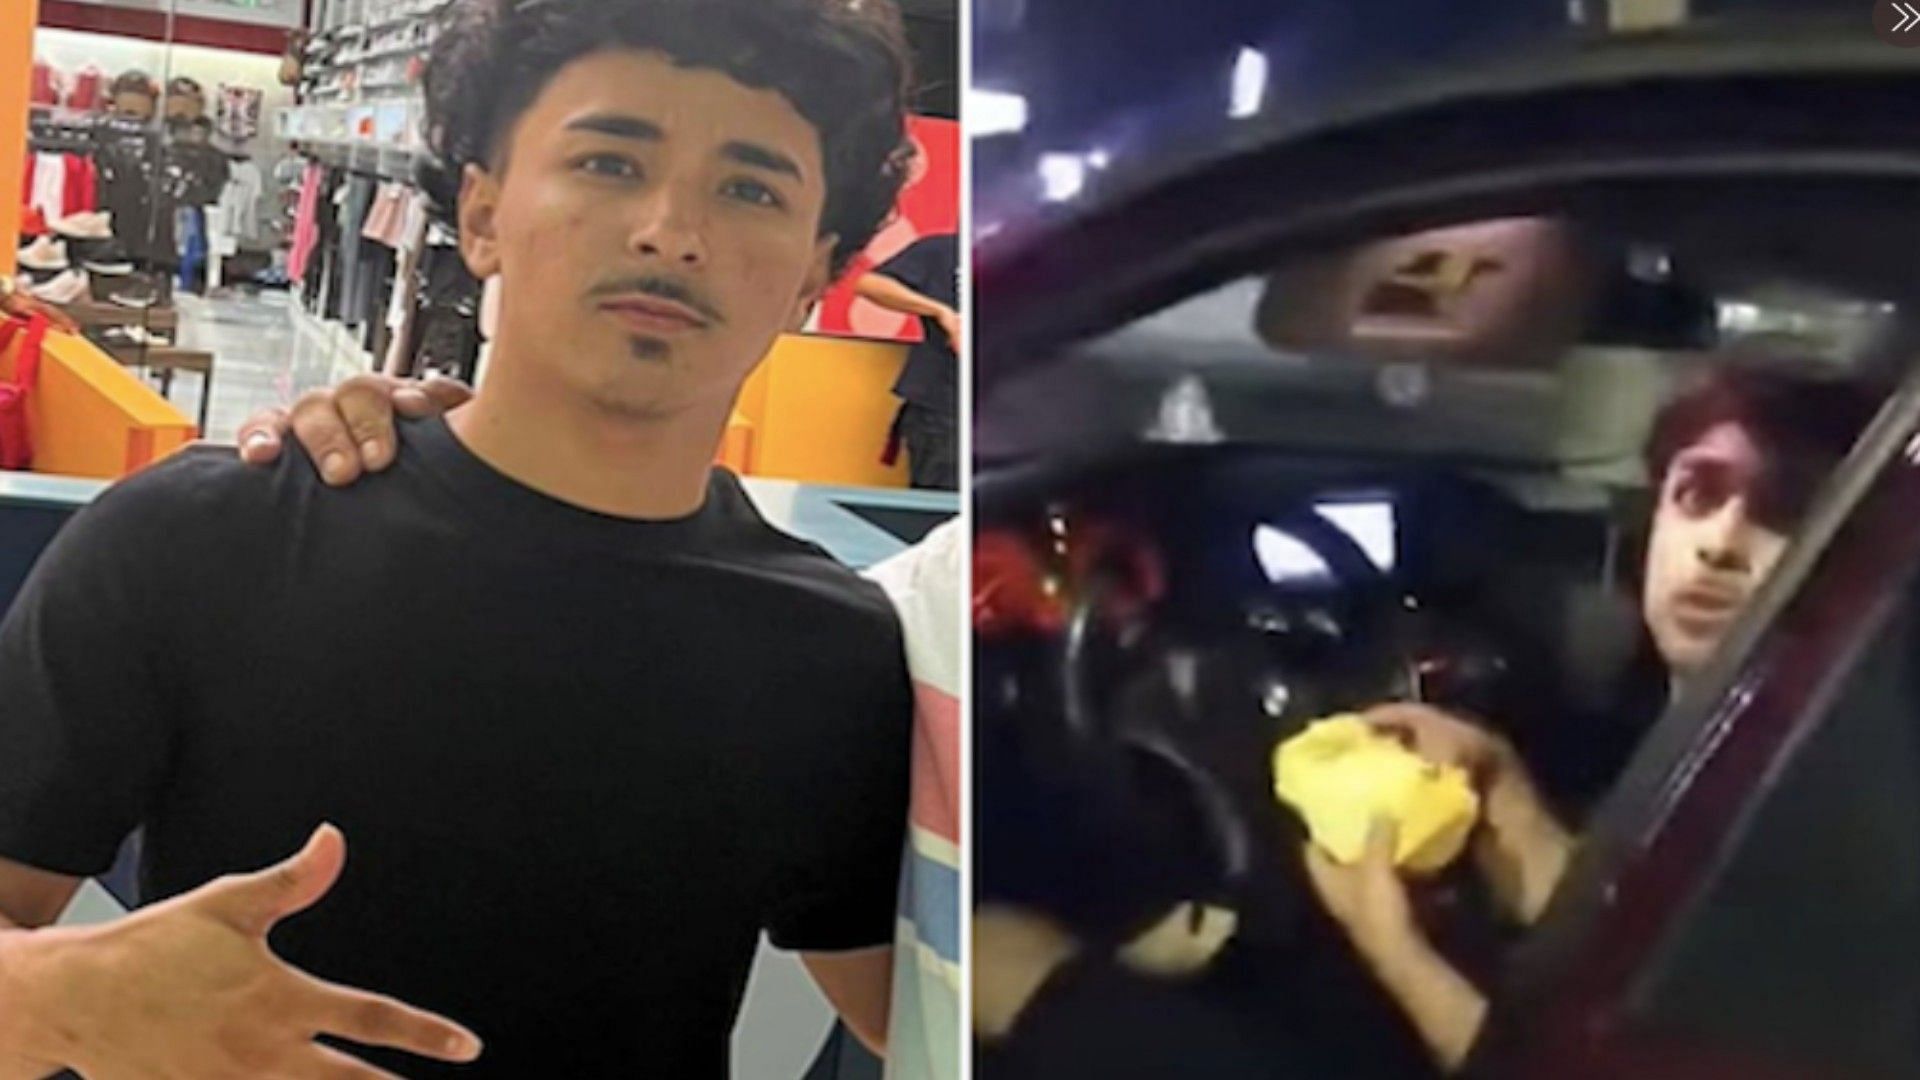 Erik Cantu GoFundMe: Family launches fundraiser as teen shot by cop at McDonald's remains under treatment